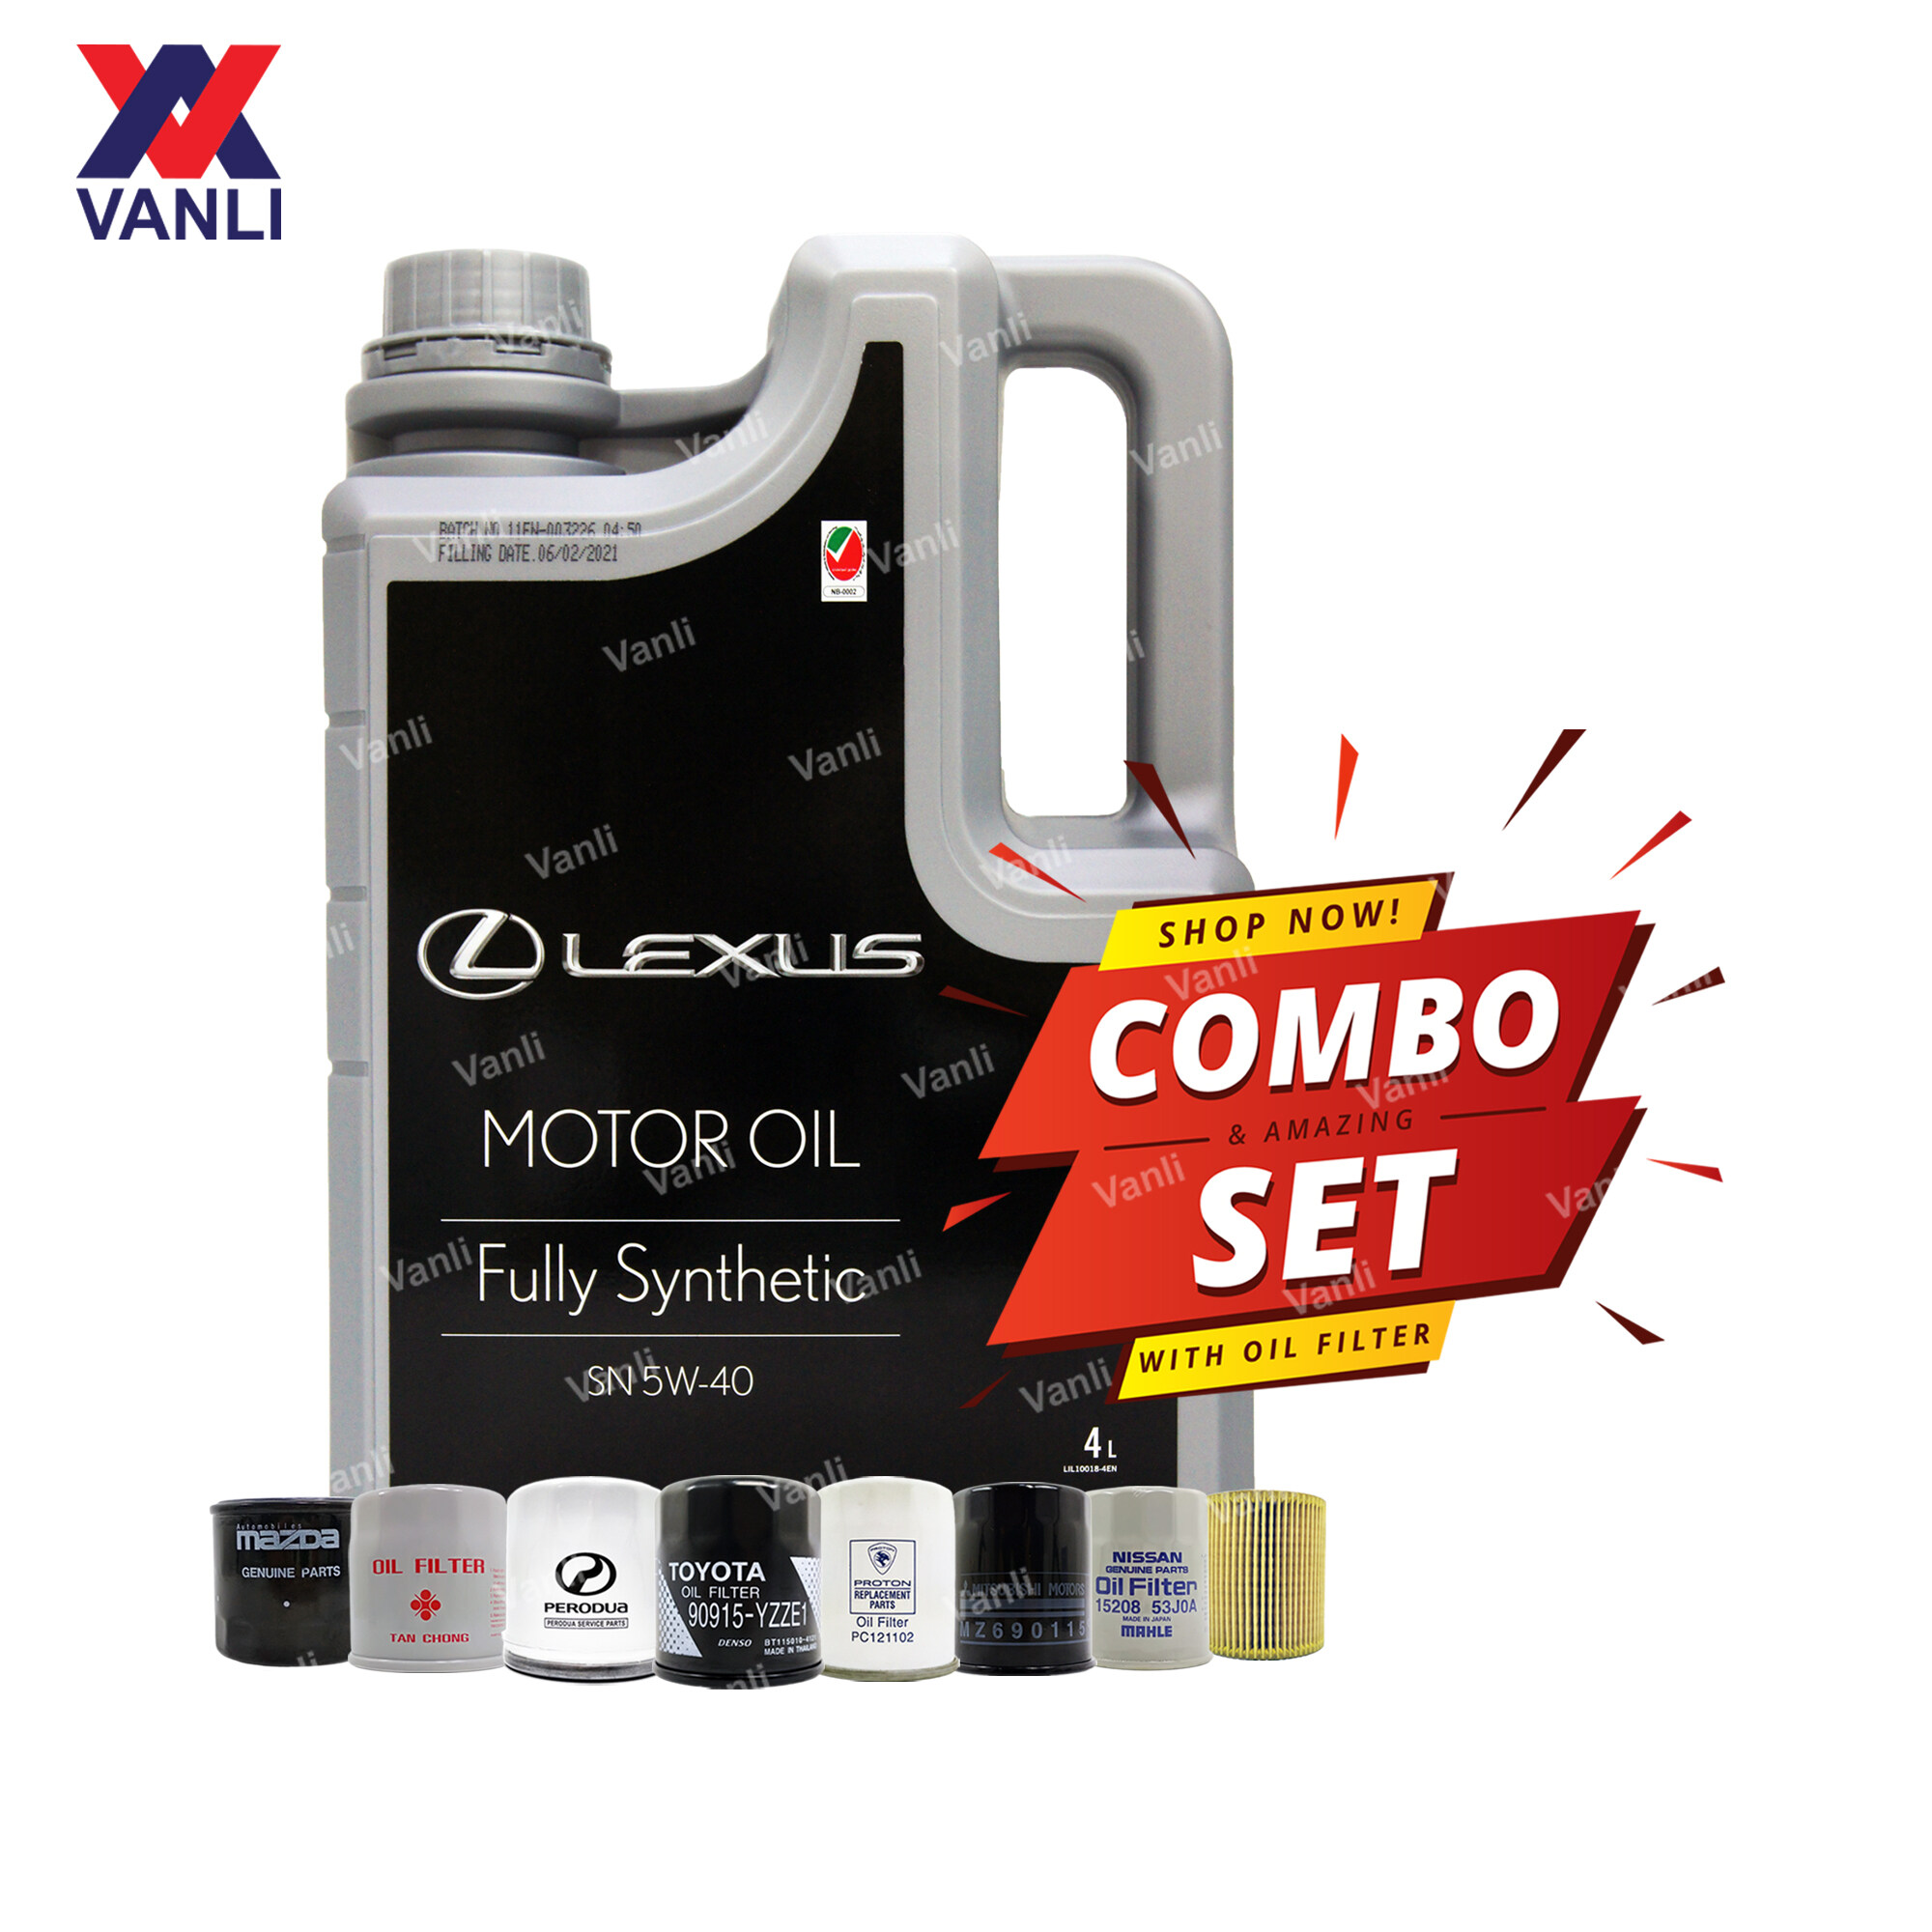 LEXUS 5W40 API SN Fully Synthetic Engine Oil 4L with Oil Filter Combo Set